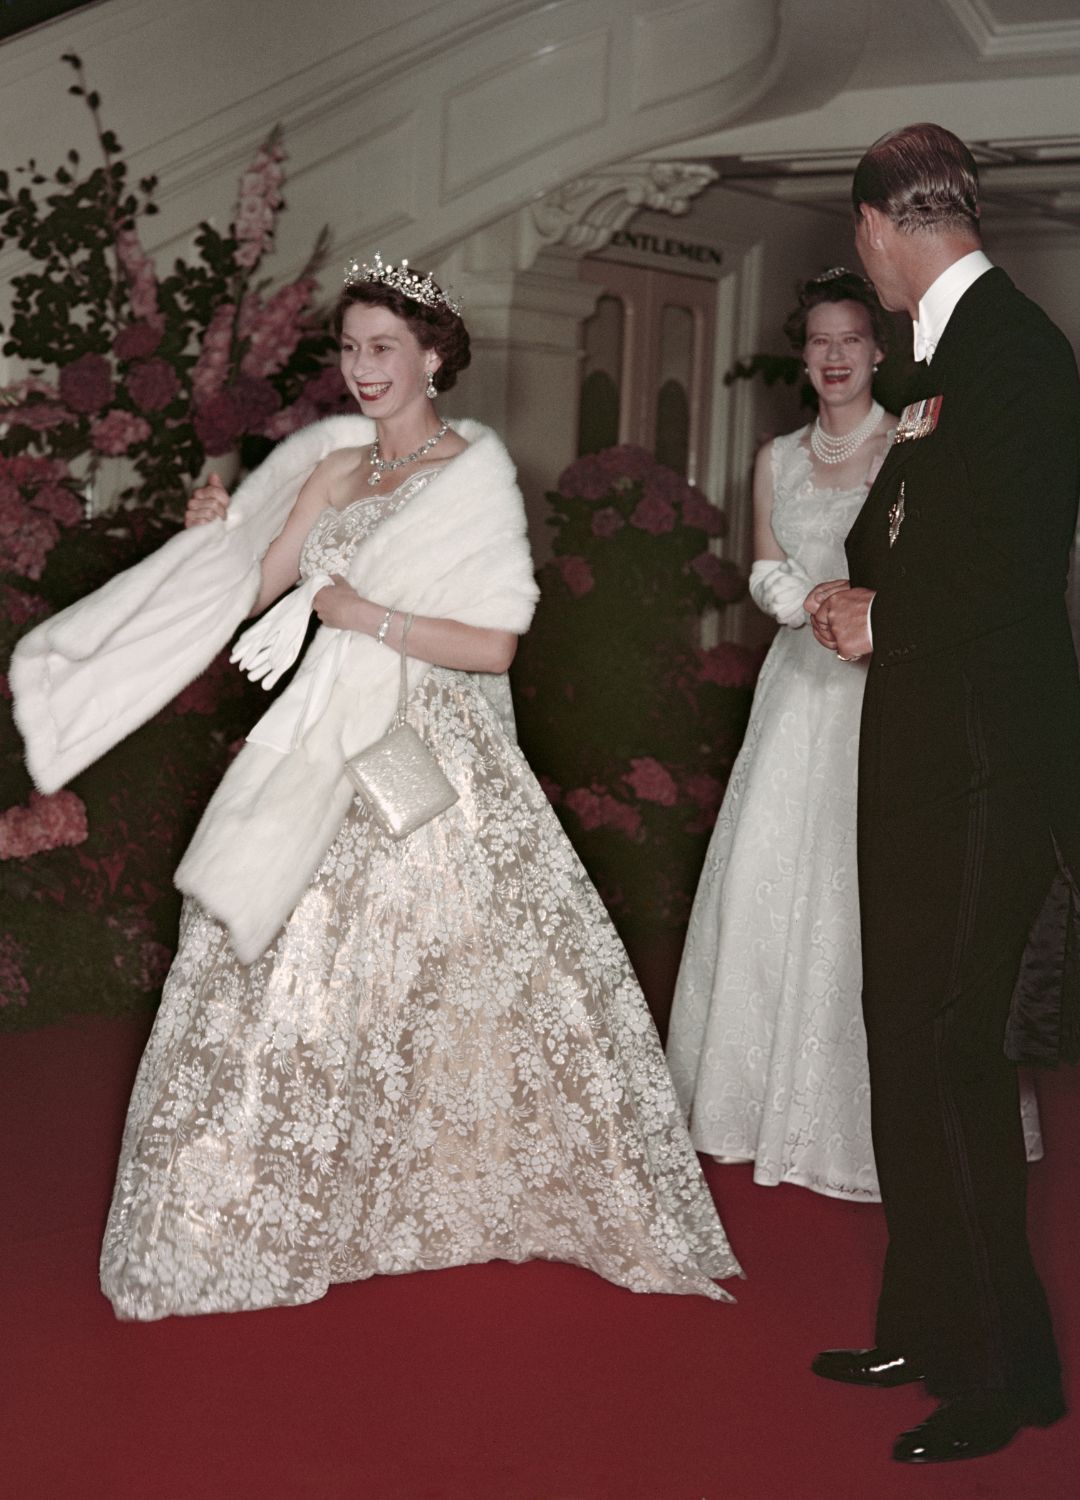 <p>                     Over her 70-year reign, the late Queen travelled the world many times and often visited Australia on Commonwealth state visits. Seen here leaving a Banquet during her visit to the country in 1954, Queen Elizabeth II wears a breathtaking white lace gown with a matching fur shrug. The real star of the show is of course the Girls of Great Britain and Ireland tiara, one of her favourites.                   </p>